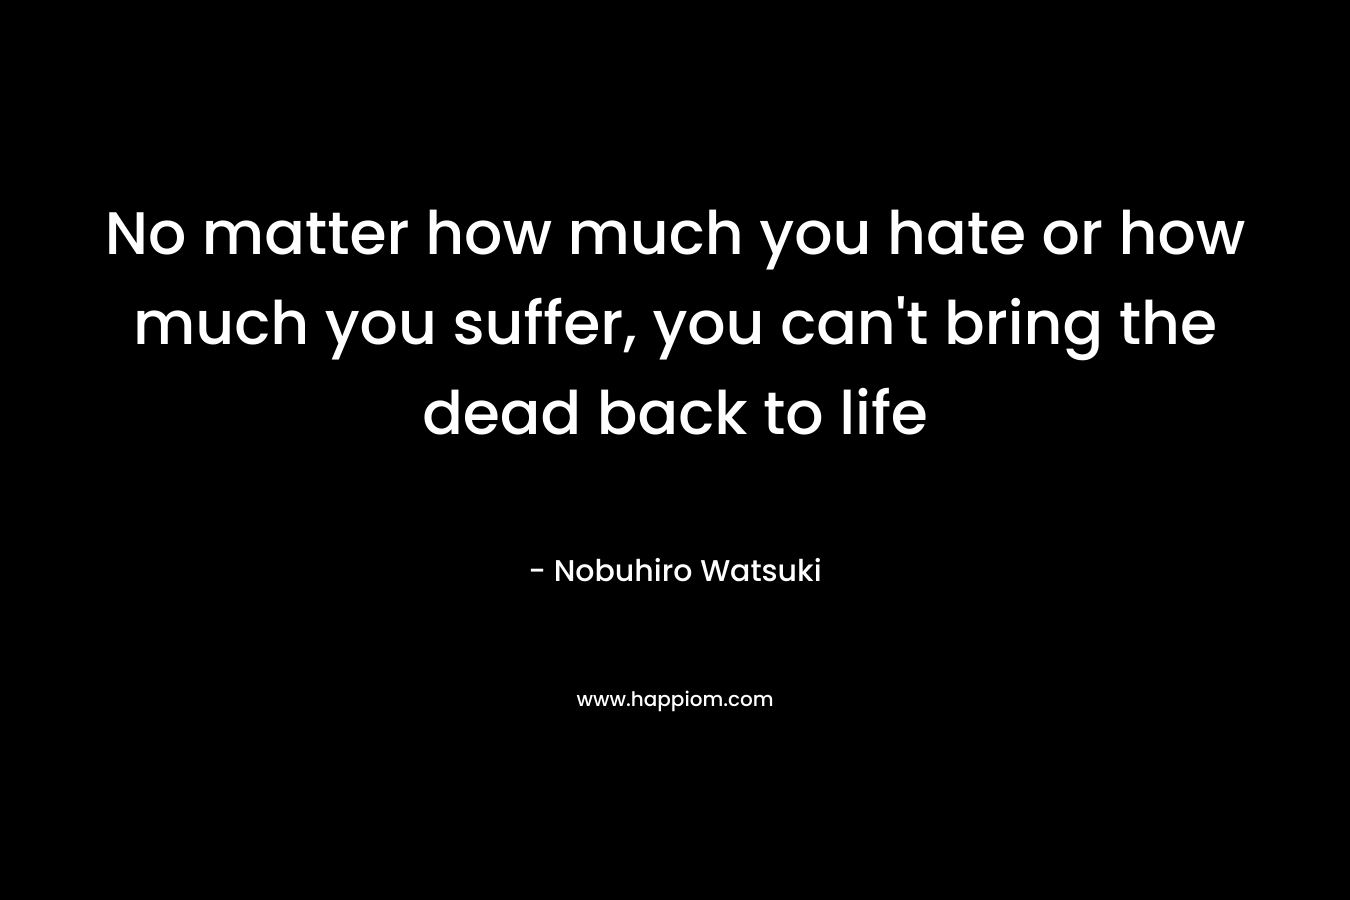 No matter how much you hate or how much you suffer, you can't bring the dead back to life